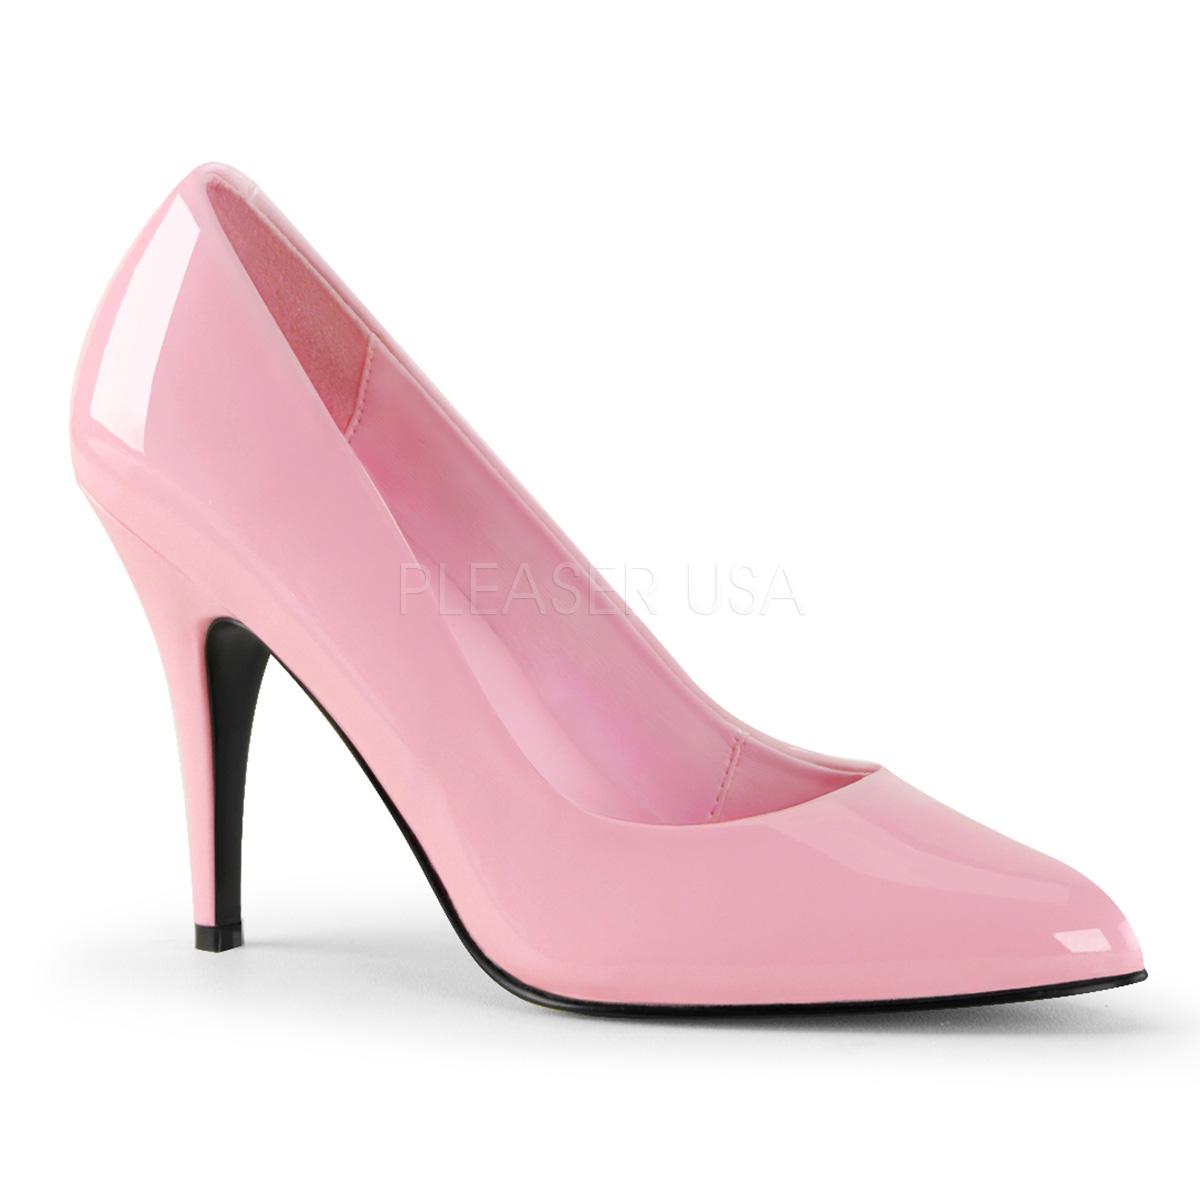 Large fitting Baby Pink Patent Court Shoe